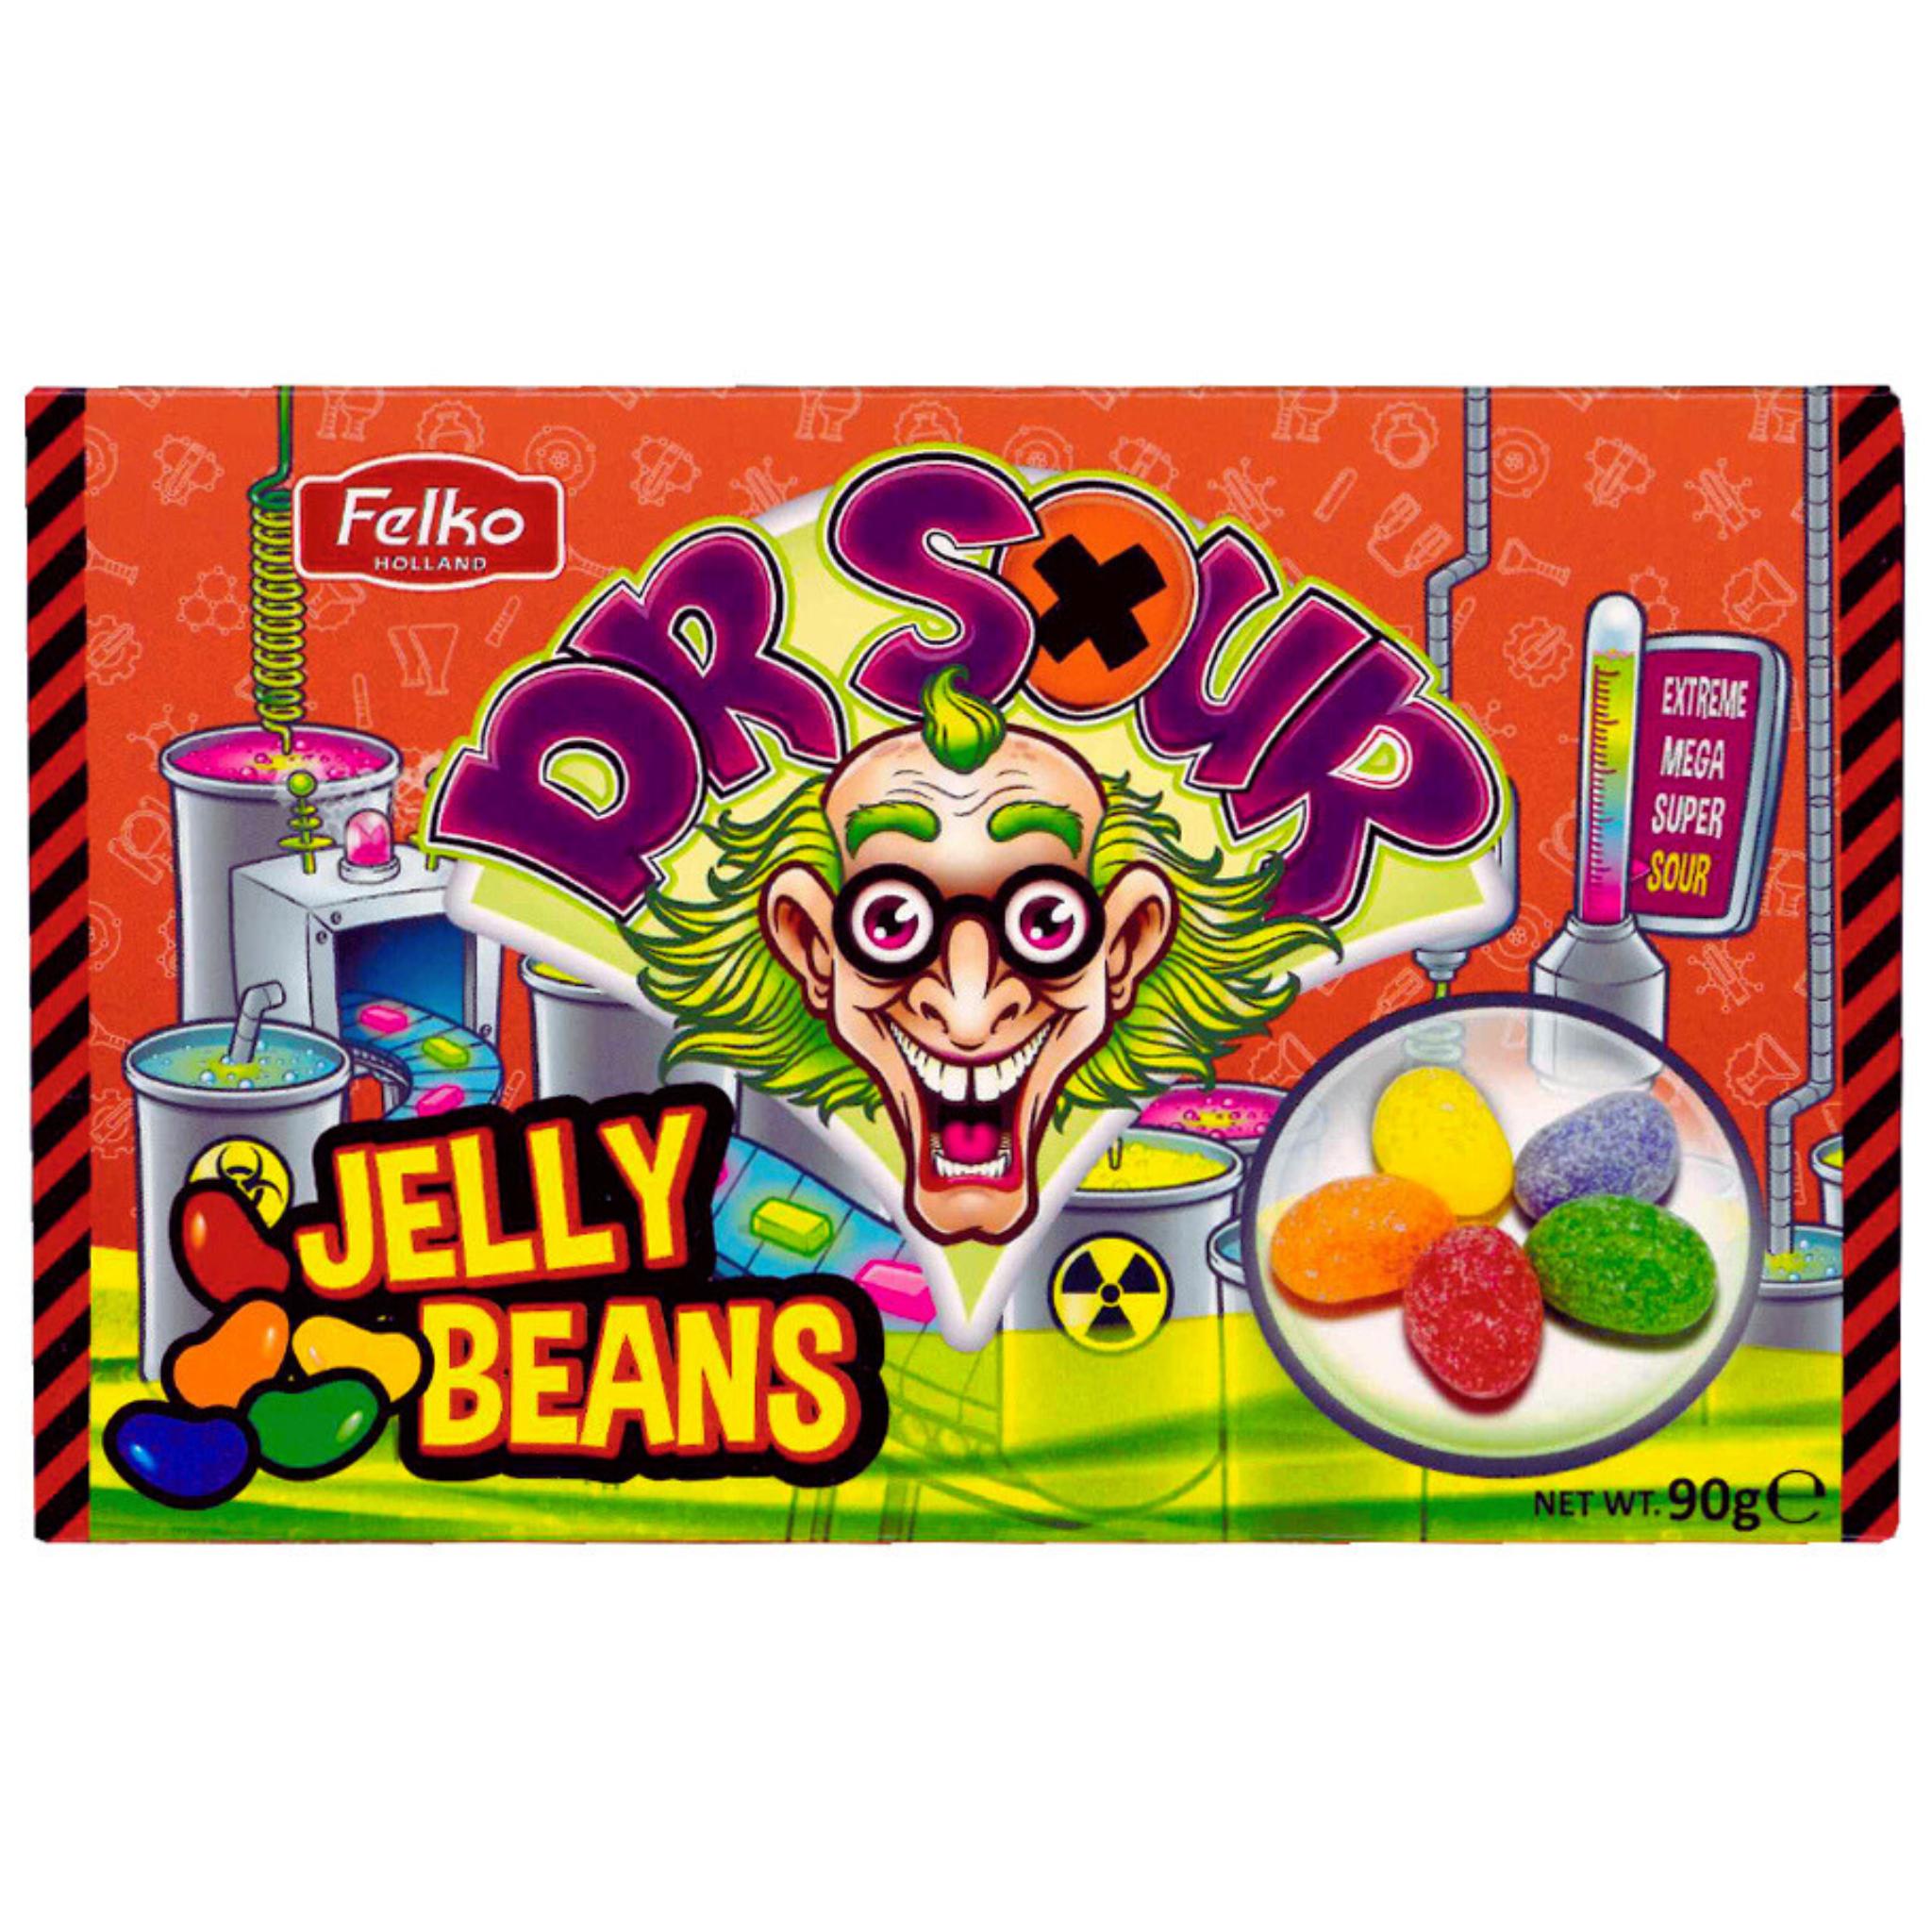 Dr Sour Jelly Beans - 90g